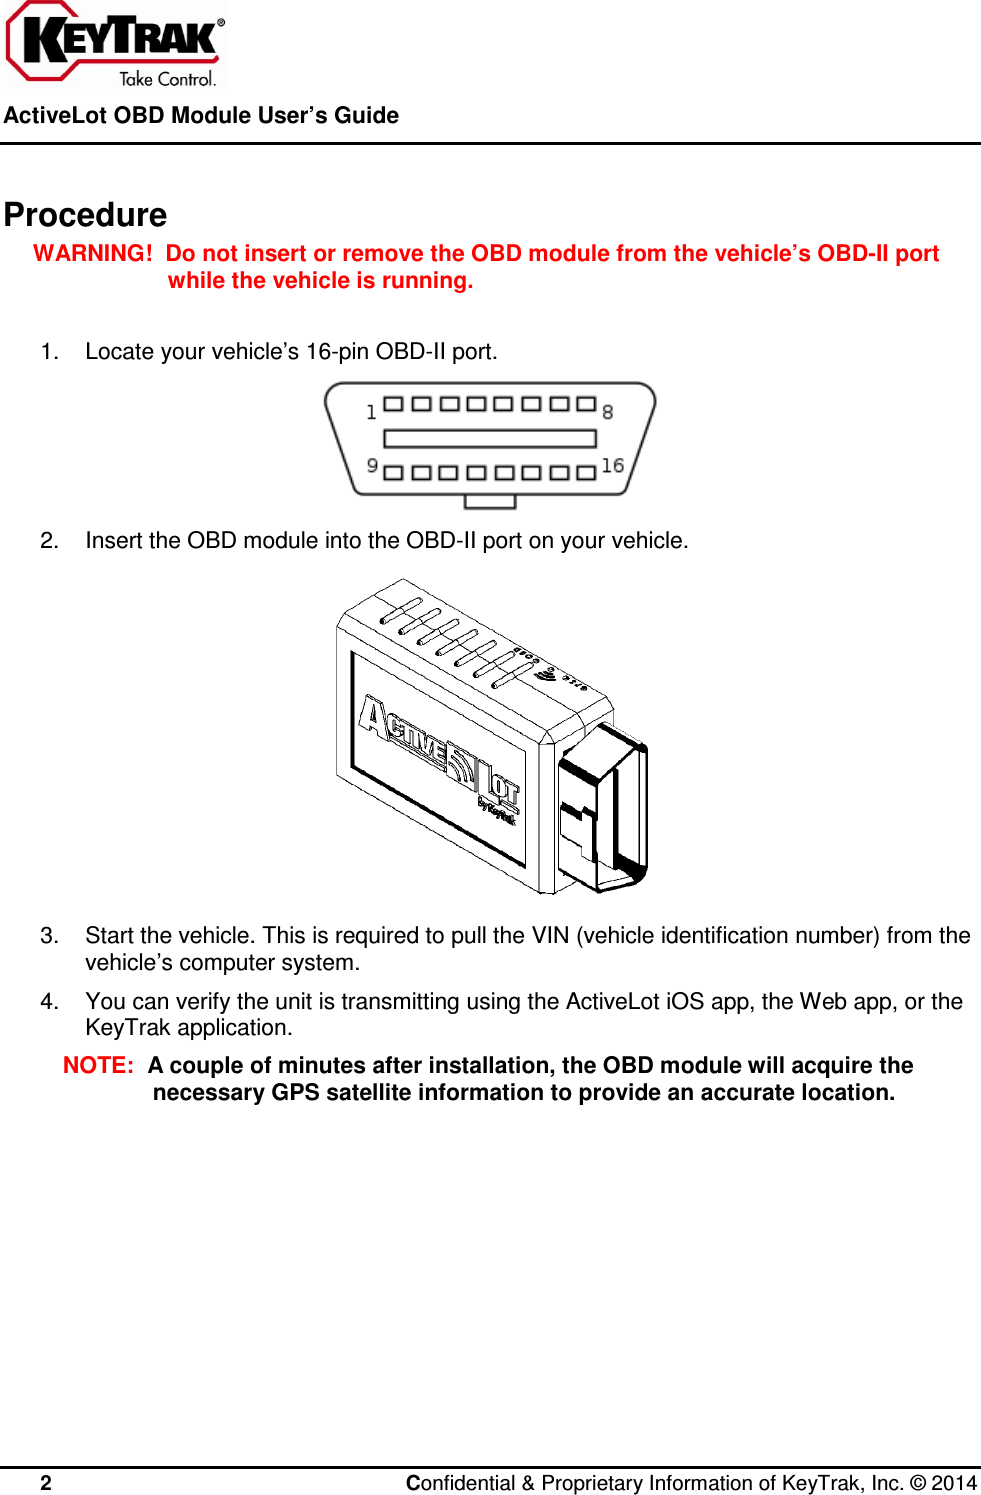  ActiveLot OBD Module User’s Guide    2  Confidential &amp; Proprietary Information of KeyTrak, Inc. © 2014   Procedure WARNING!  Do not insert or remove the OBD module from the vehicle’s OBD-II port while the vehicle is running.  1.  Locate your vehicle’s 16-pin OBD-II port.  2.  Insert the OBD module into the OBD-II port on your vehicle.  3.  Start the vehicle. This is required to pull the VIN (vehicle identification number) from the vehicle’s computer system. 4.  You can verify the unit is transmitting using the ActiveLot iOS app, the Web app, or the KeyTrak application. NOTE:  A couple of minutes after installation, the OBD module will acquire the necessary GPS satellite information to provide an accurate location.  